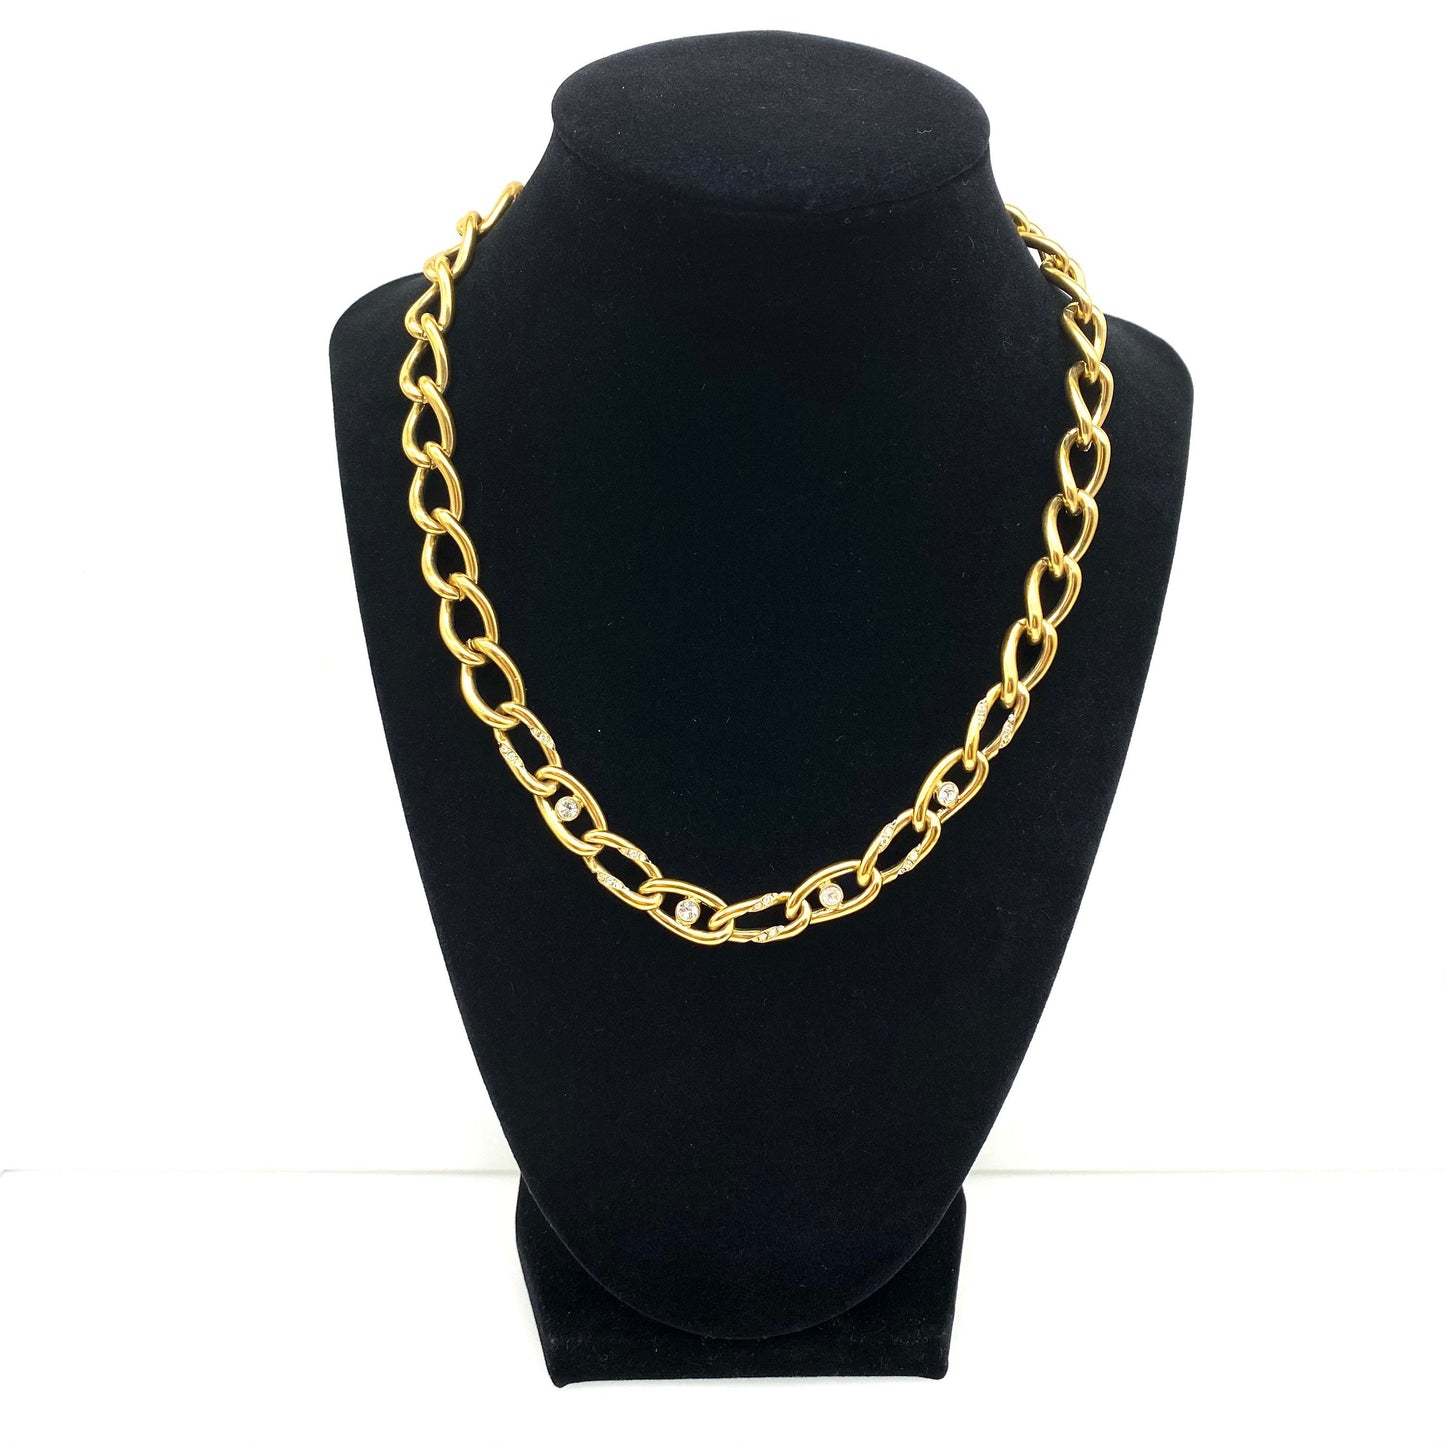 Givenchy Swarovski Crystal Accent Large Curb Chain